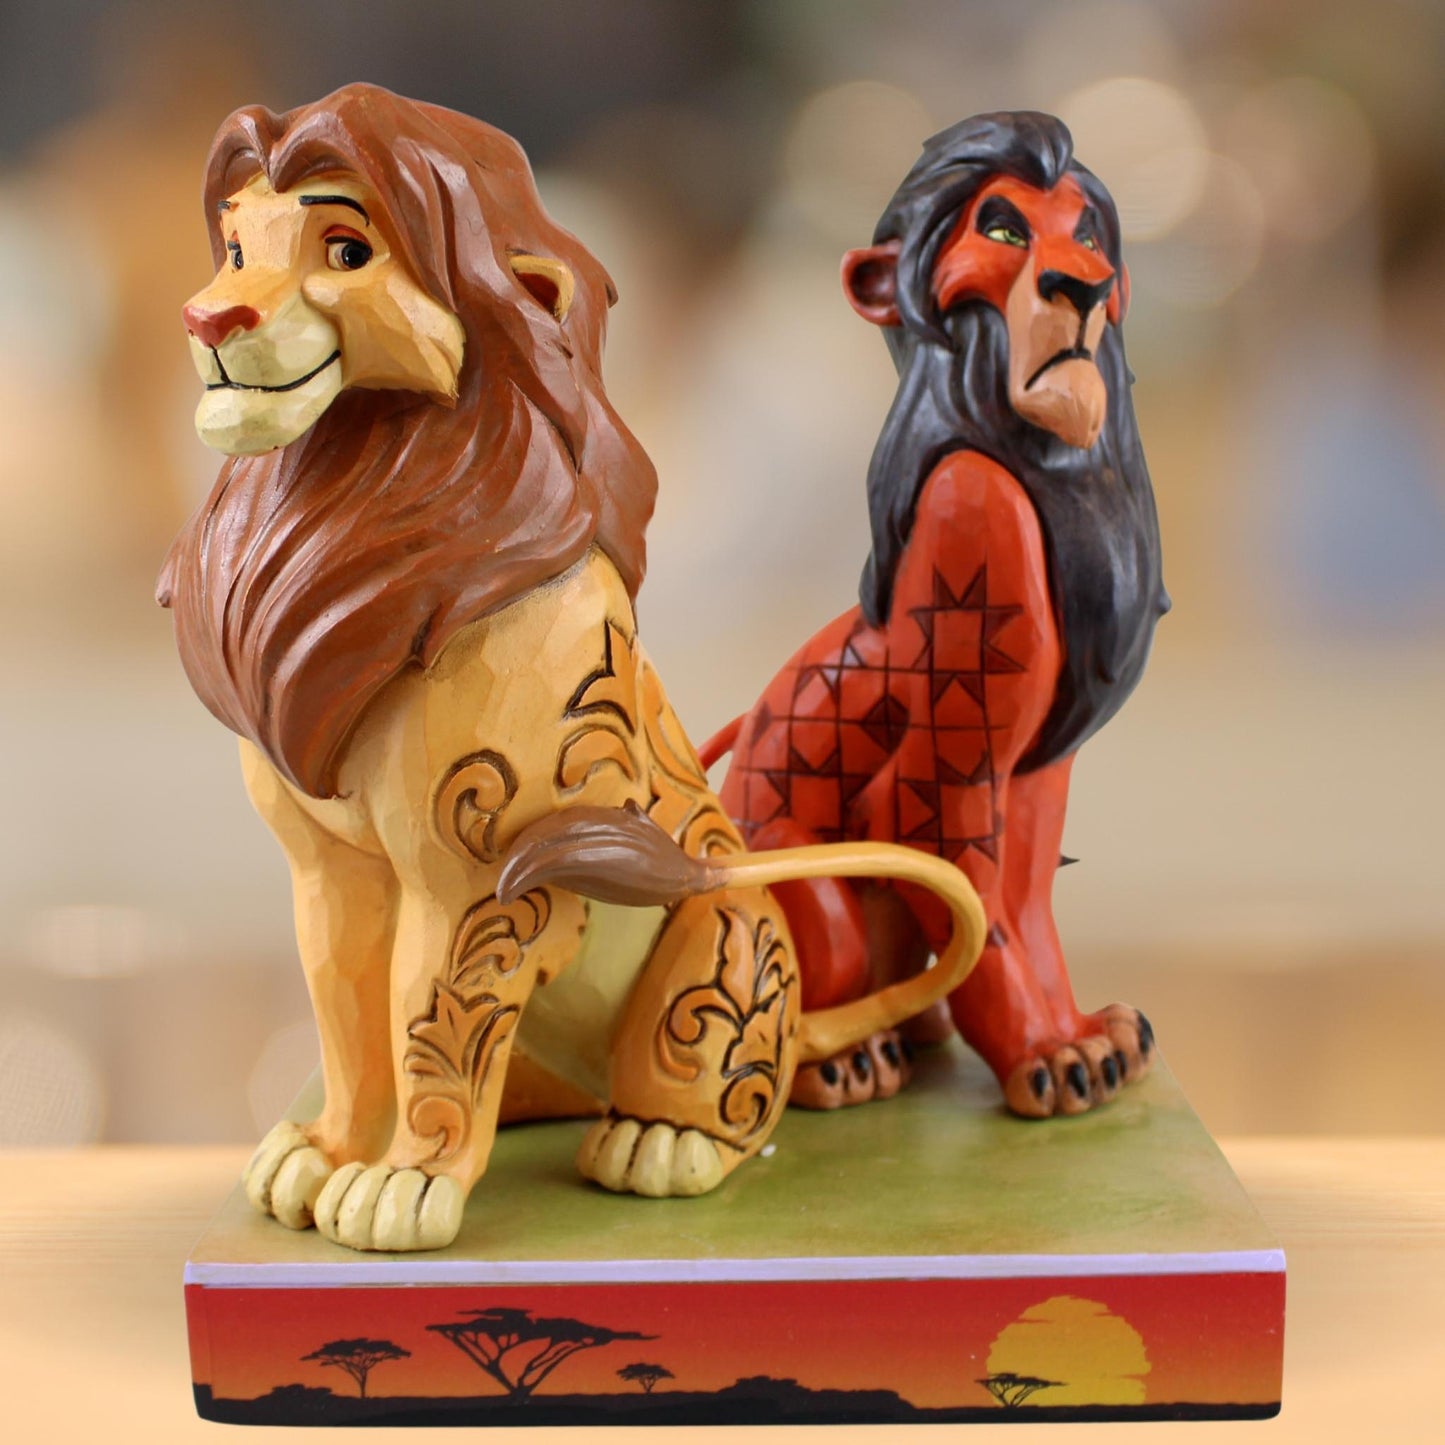 Lion King Carved in Stone - Disney Collectible By Jim Shore – Disney Art On  Main Street